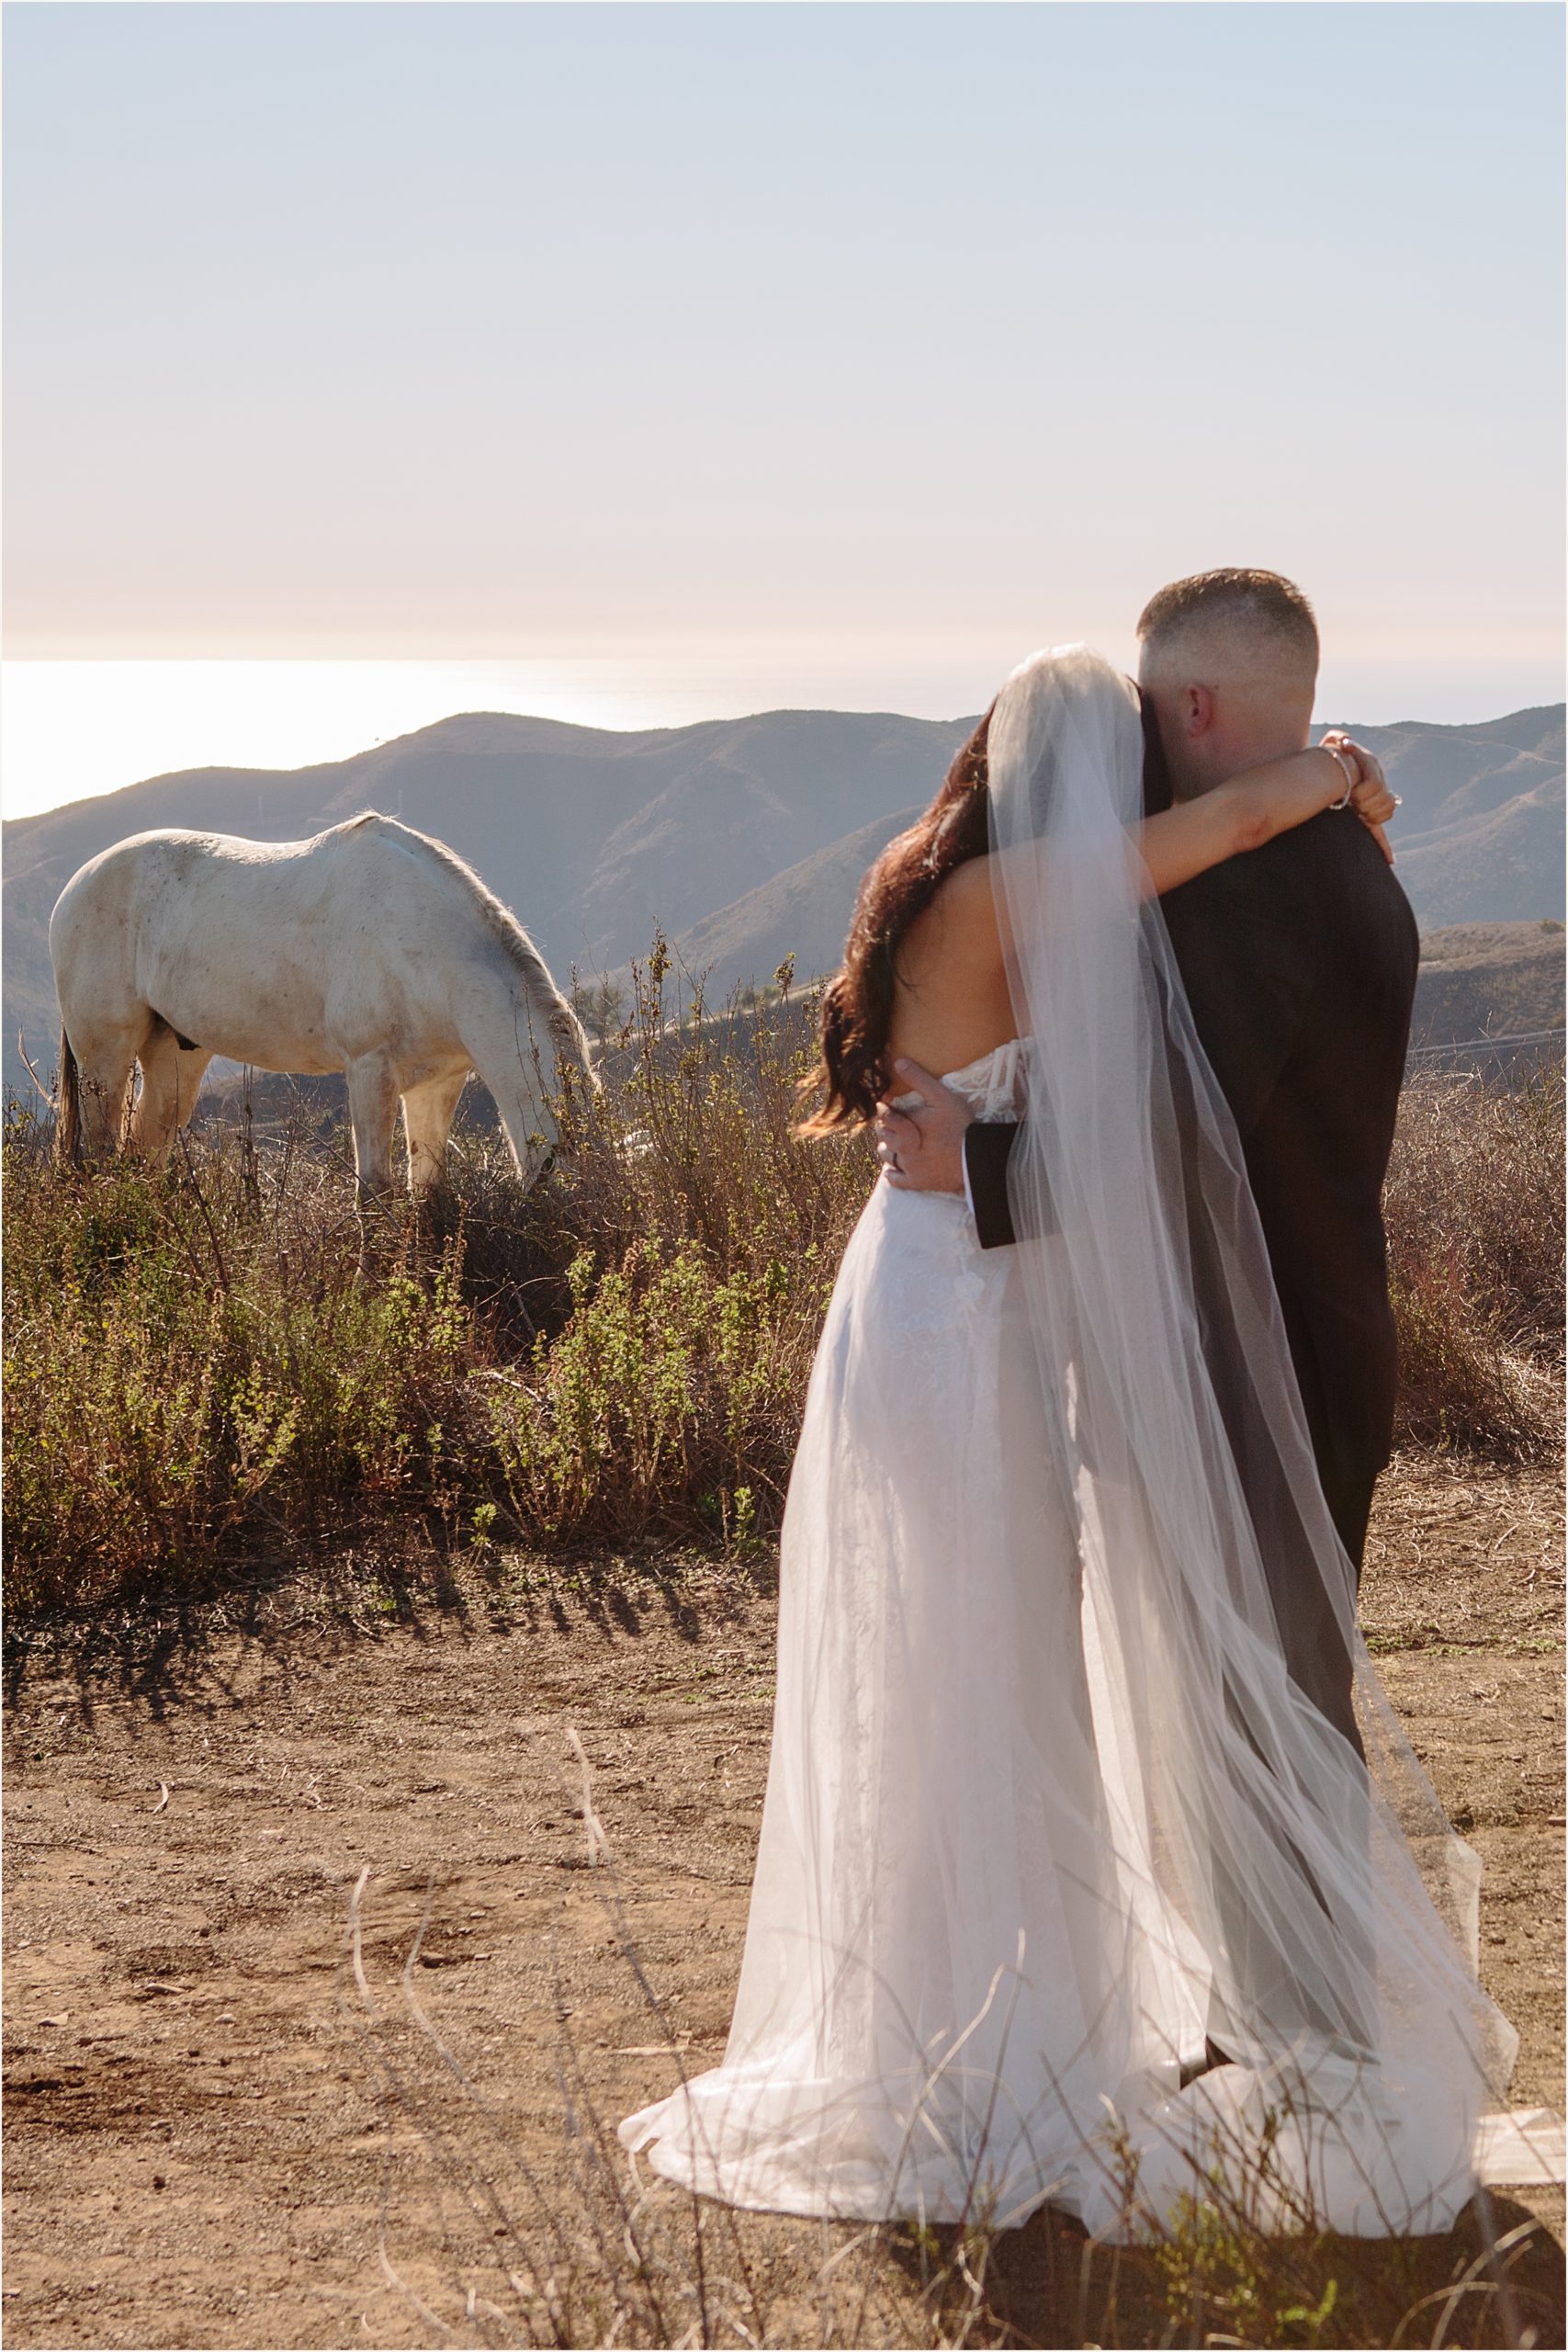 Photo of bride and groom holding eachother while looking at white horse in the background